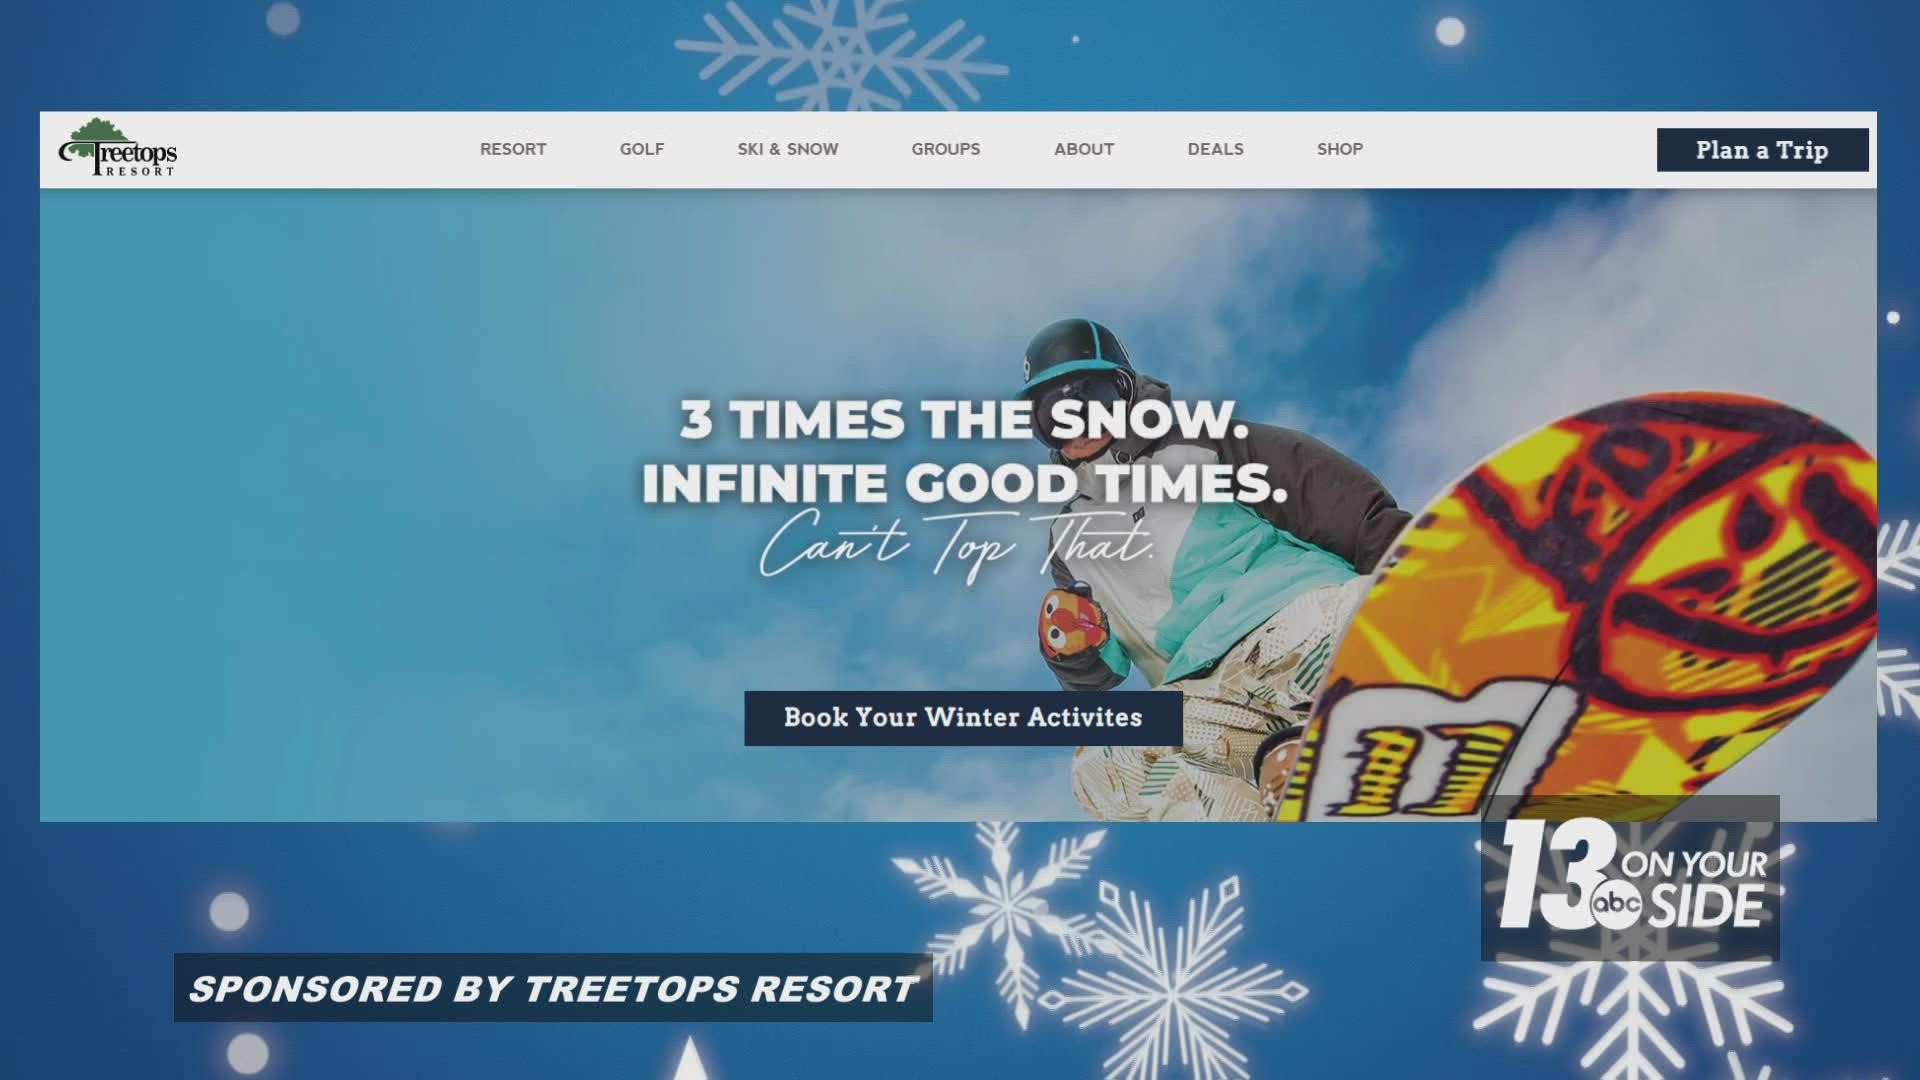 There is an assortment of lodging options available. Book your Treetops Resort vacation at www.Treetops.com.